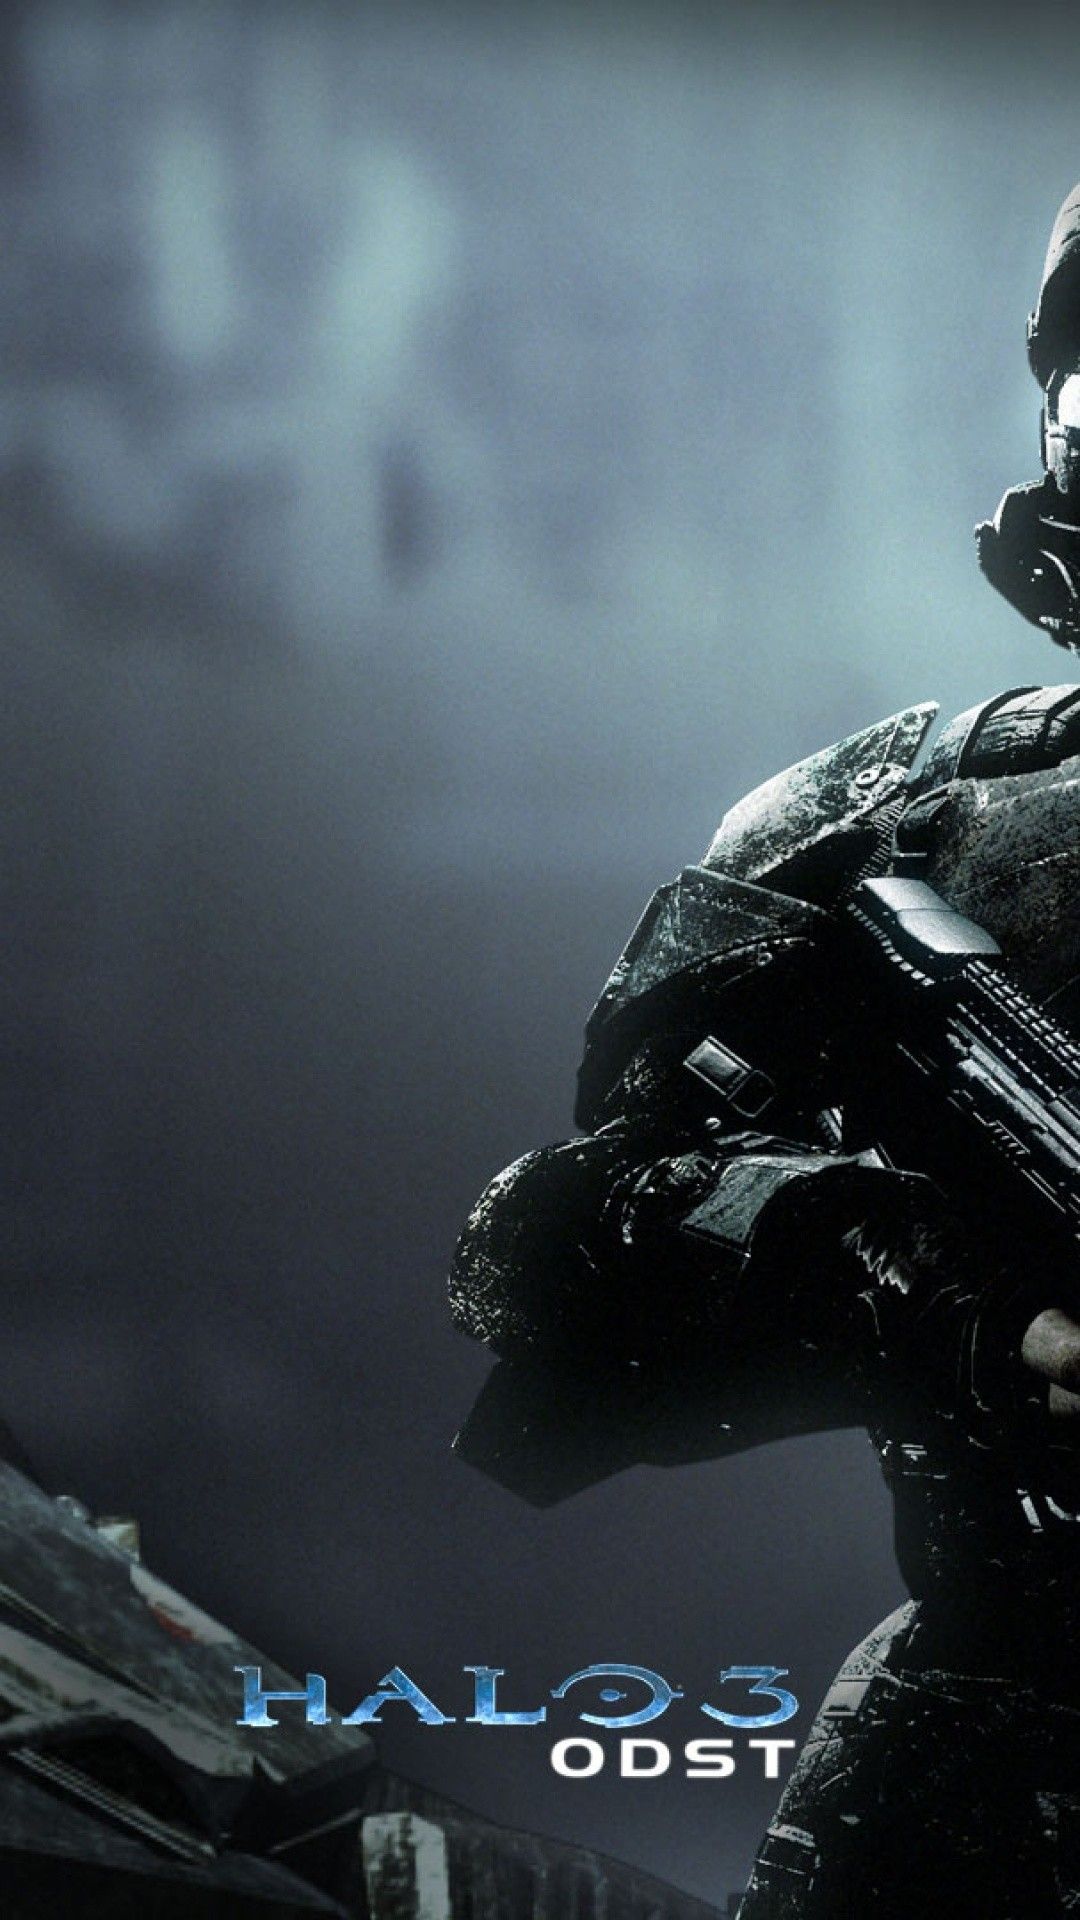 Halo 3 Odst iPhone 5 Wallpaper 3 Odst Wallpaper iPhone